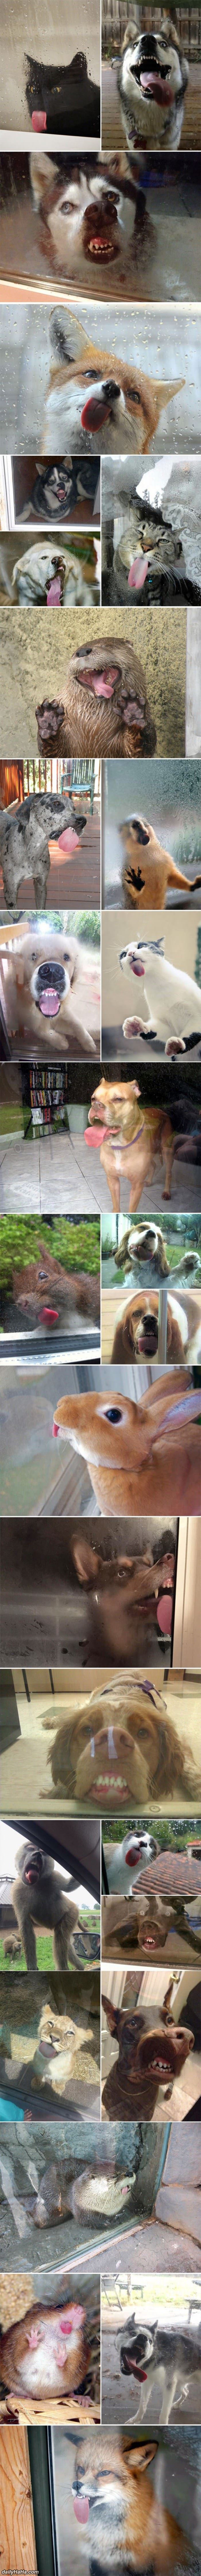 some animals licking windows funny picture